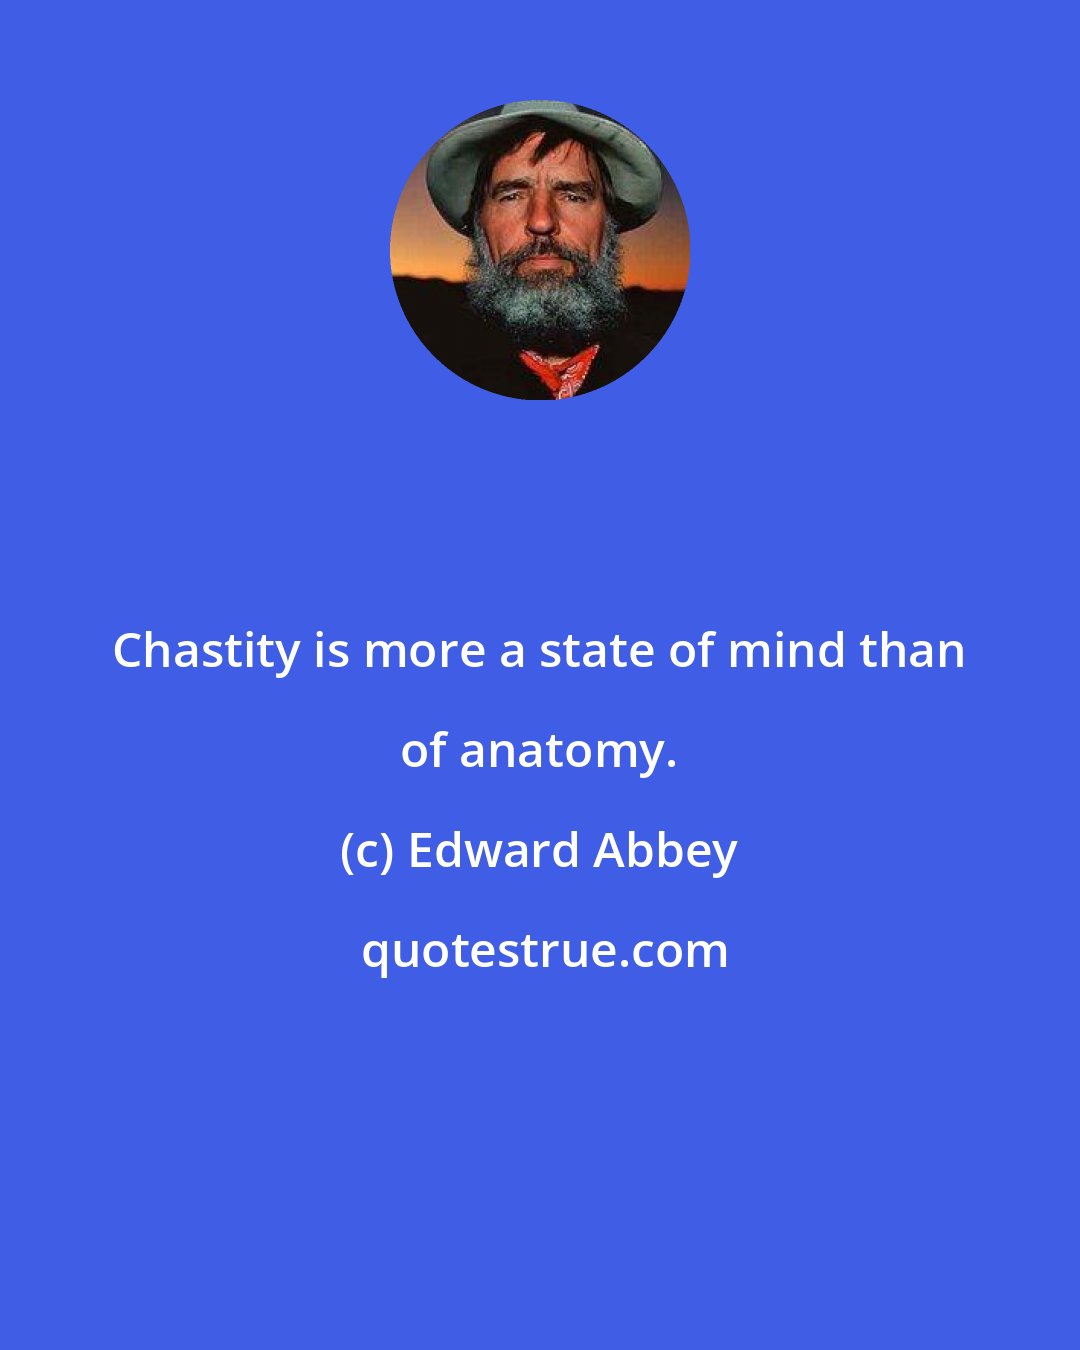 Edward Abbey: Chastity is more a state of mind than of anatomy.